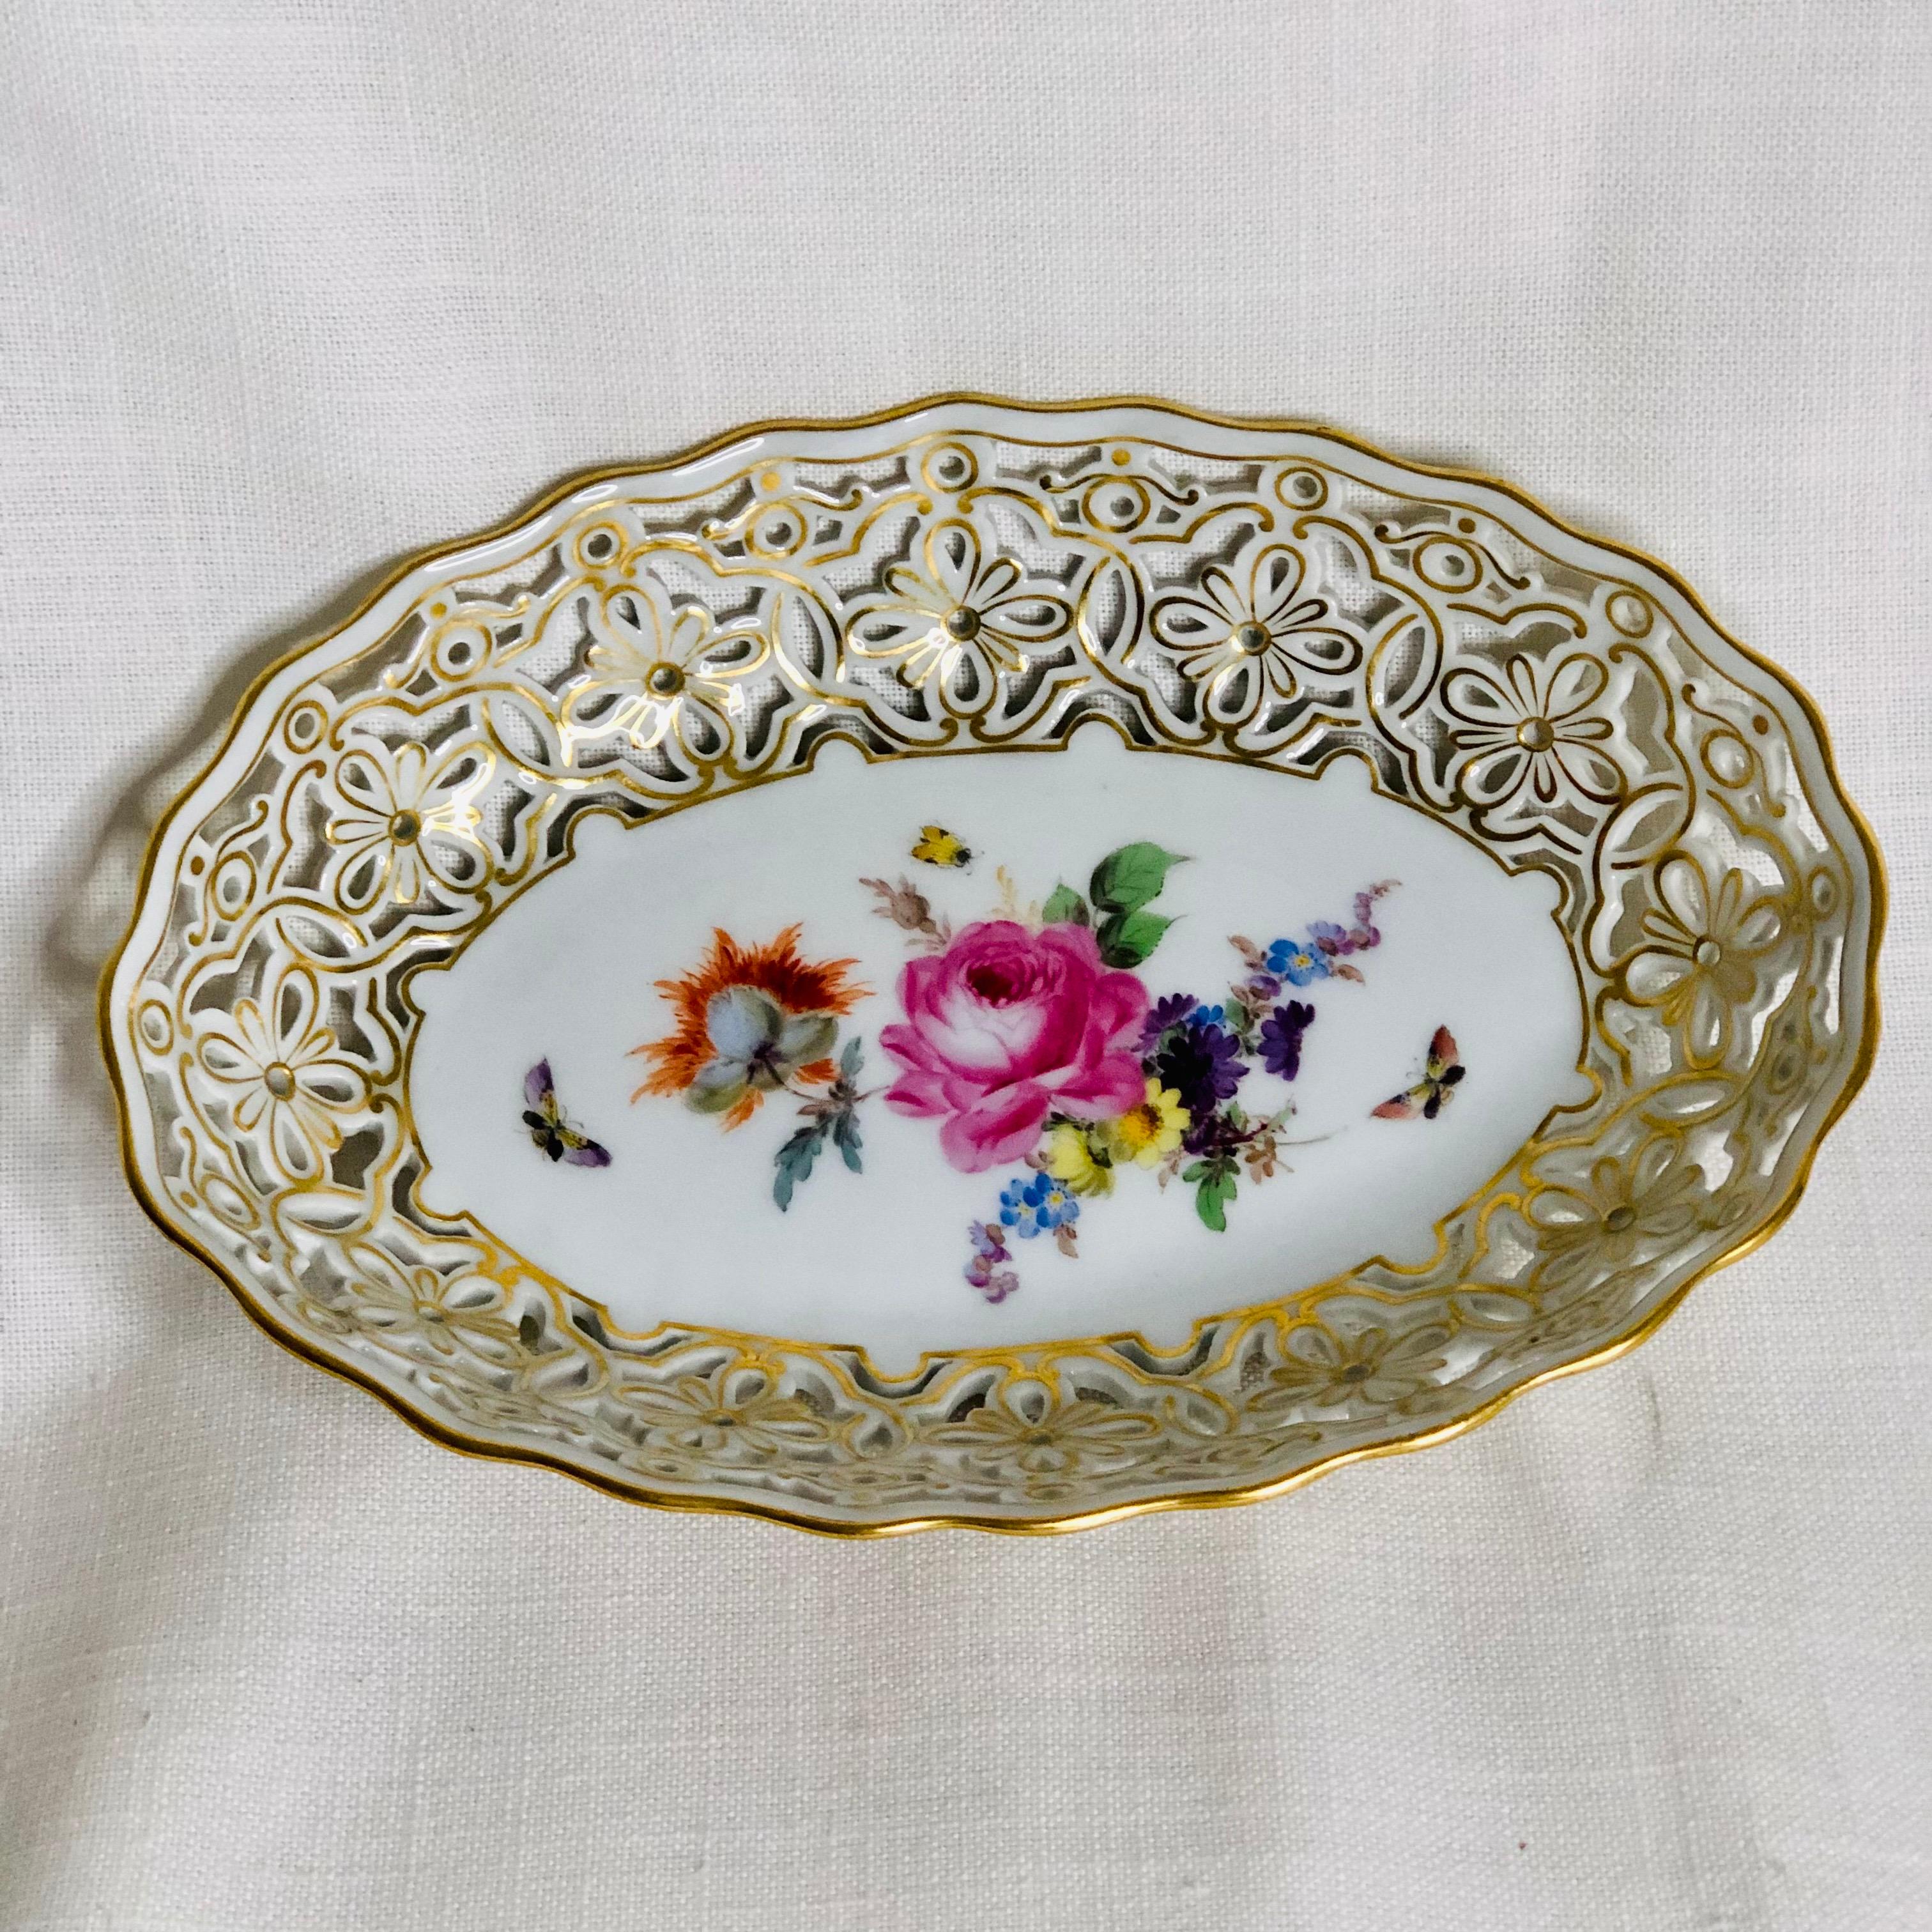 This is a beautiful oval Meissen reticulated bowl hand painted with a central painting of a flower bouquet and accents of butterflies and insects. The wonderful flowered shaped reticulation on this bowl is surrounded by a gold border on its top and